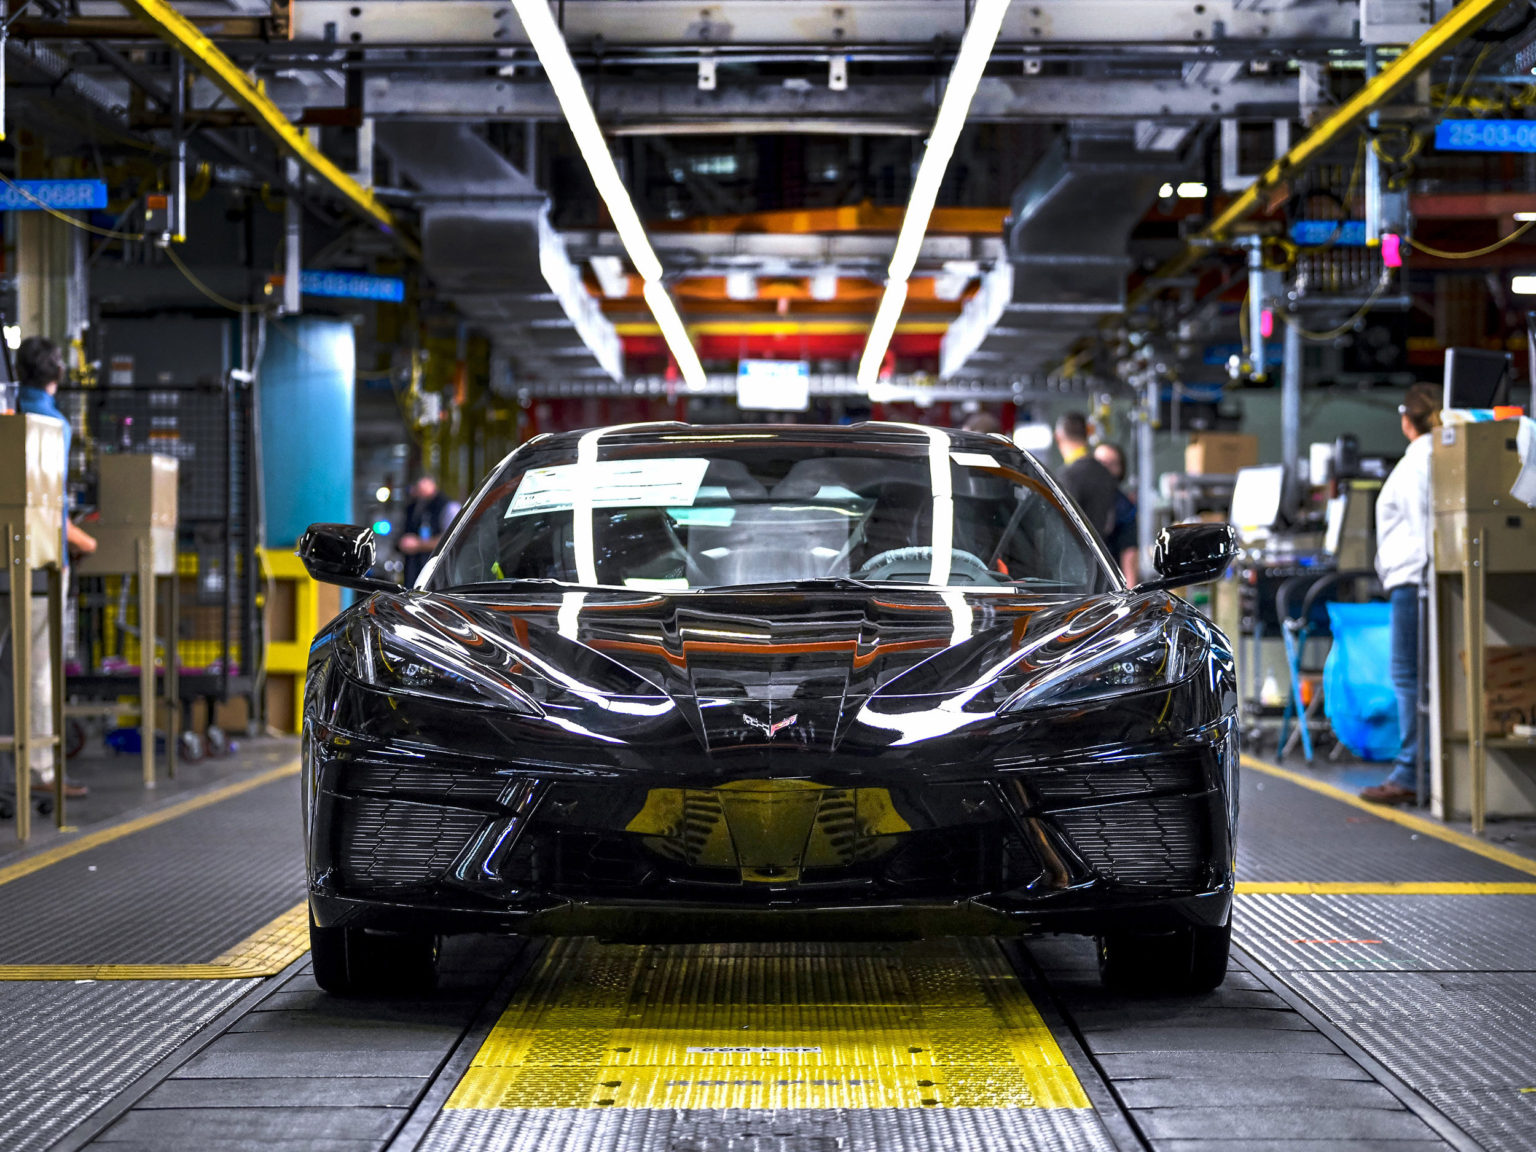 The first Corvette C8 rolled off the assembly line in Bowling Green, Kentucky this morning.